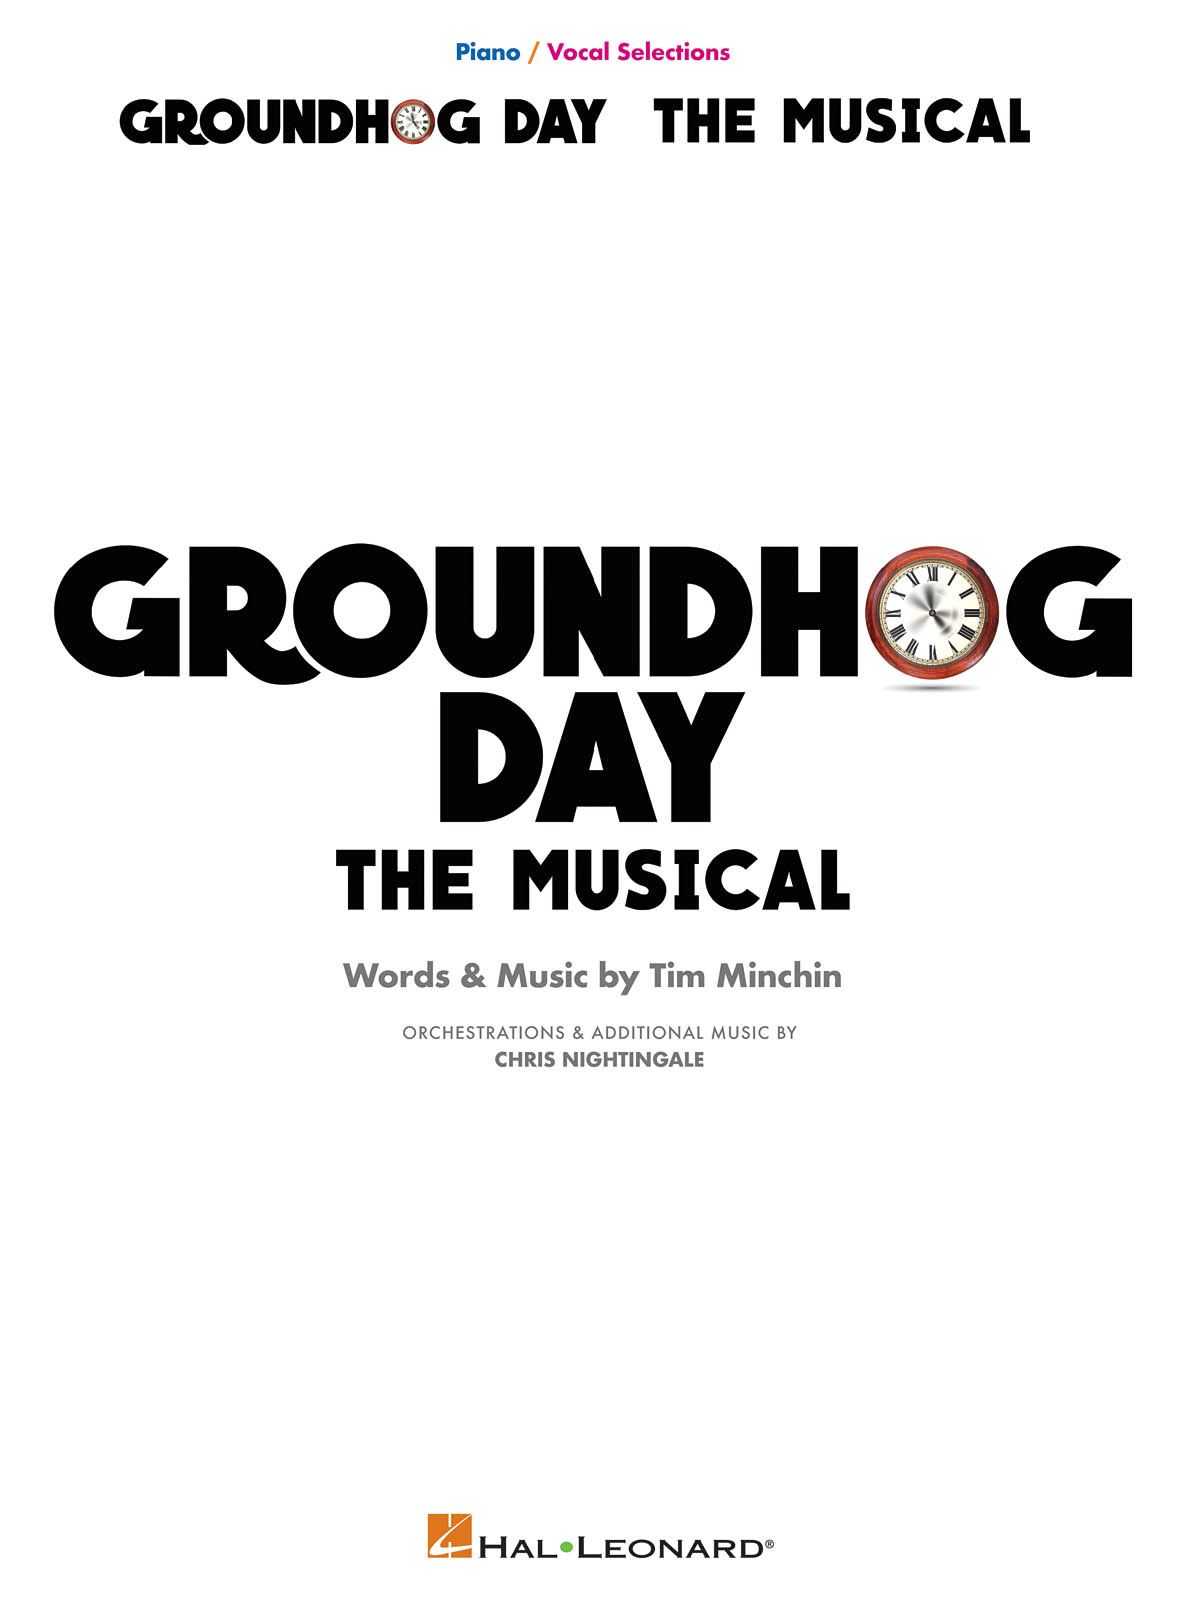 Groundhog Day The Musical Piano/Vocal Selections